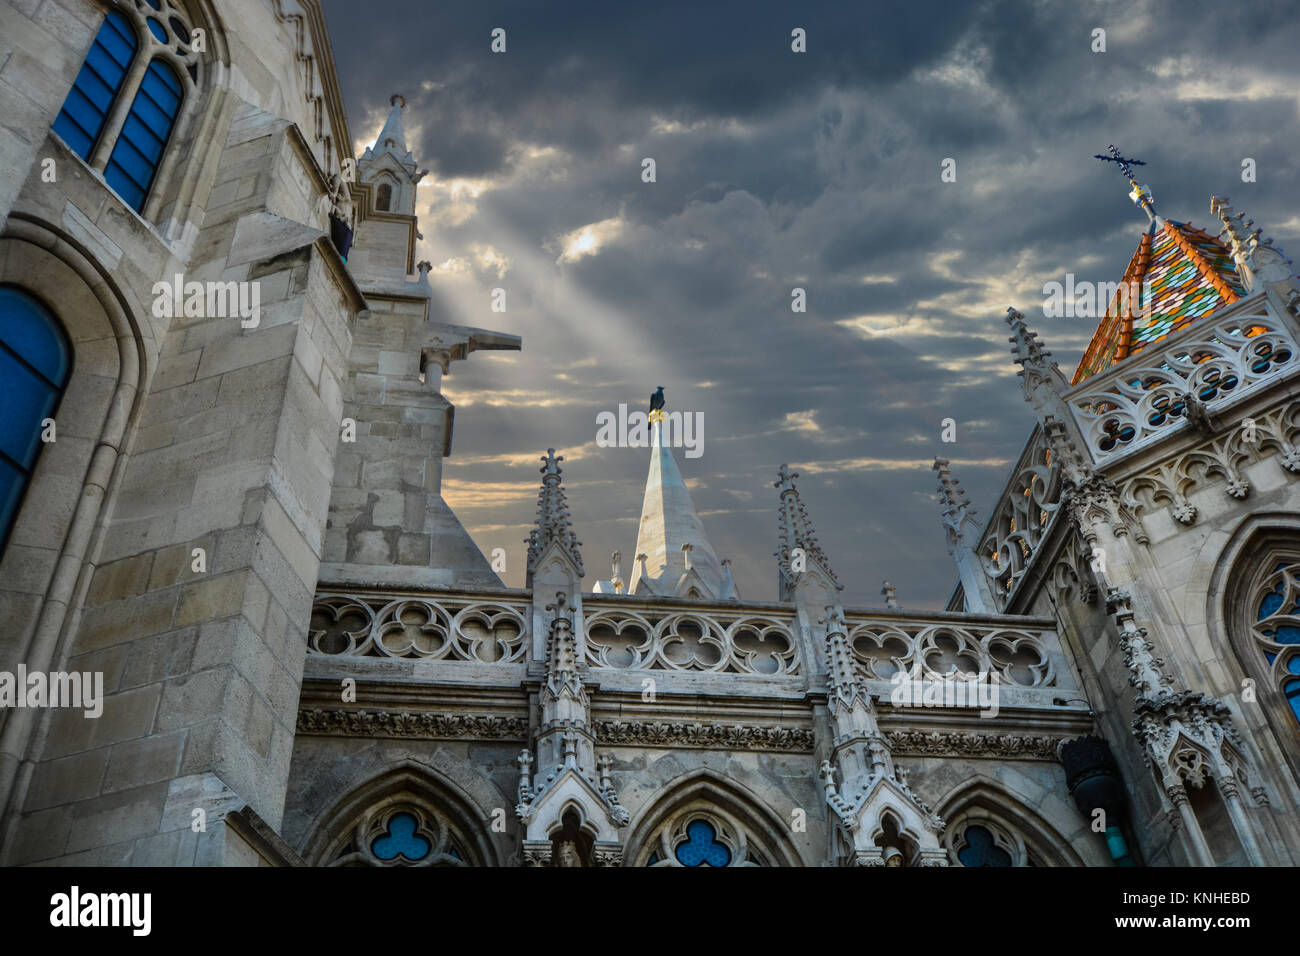 Matthias Church, a Roman Catholic church located in Budapest, Hungary in the Buda Castle District as a ray of sunlight through the clouds highlights. Stock Photo